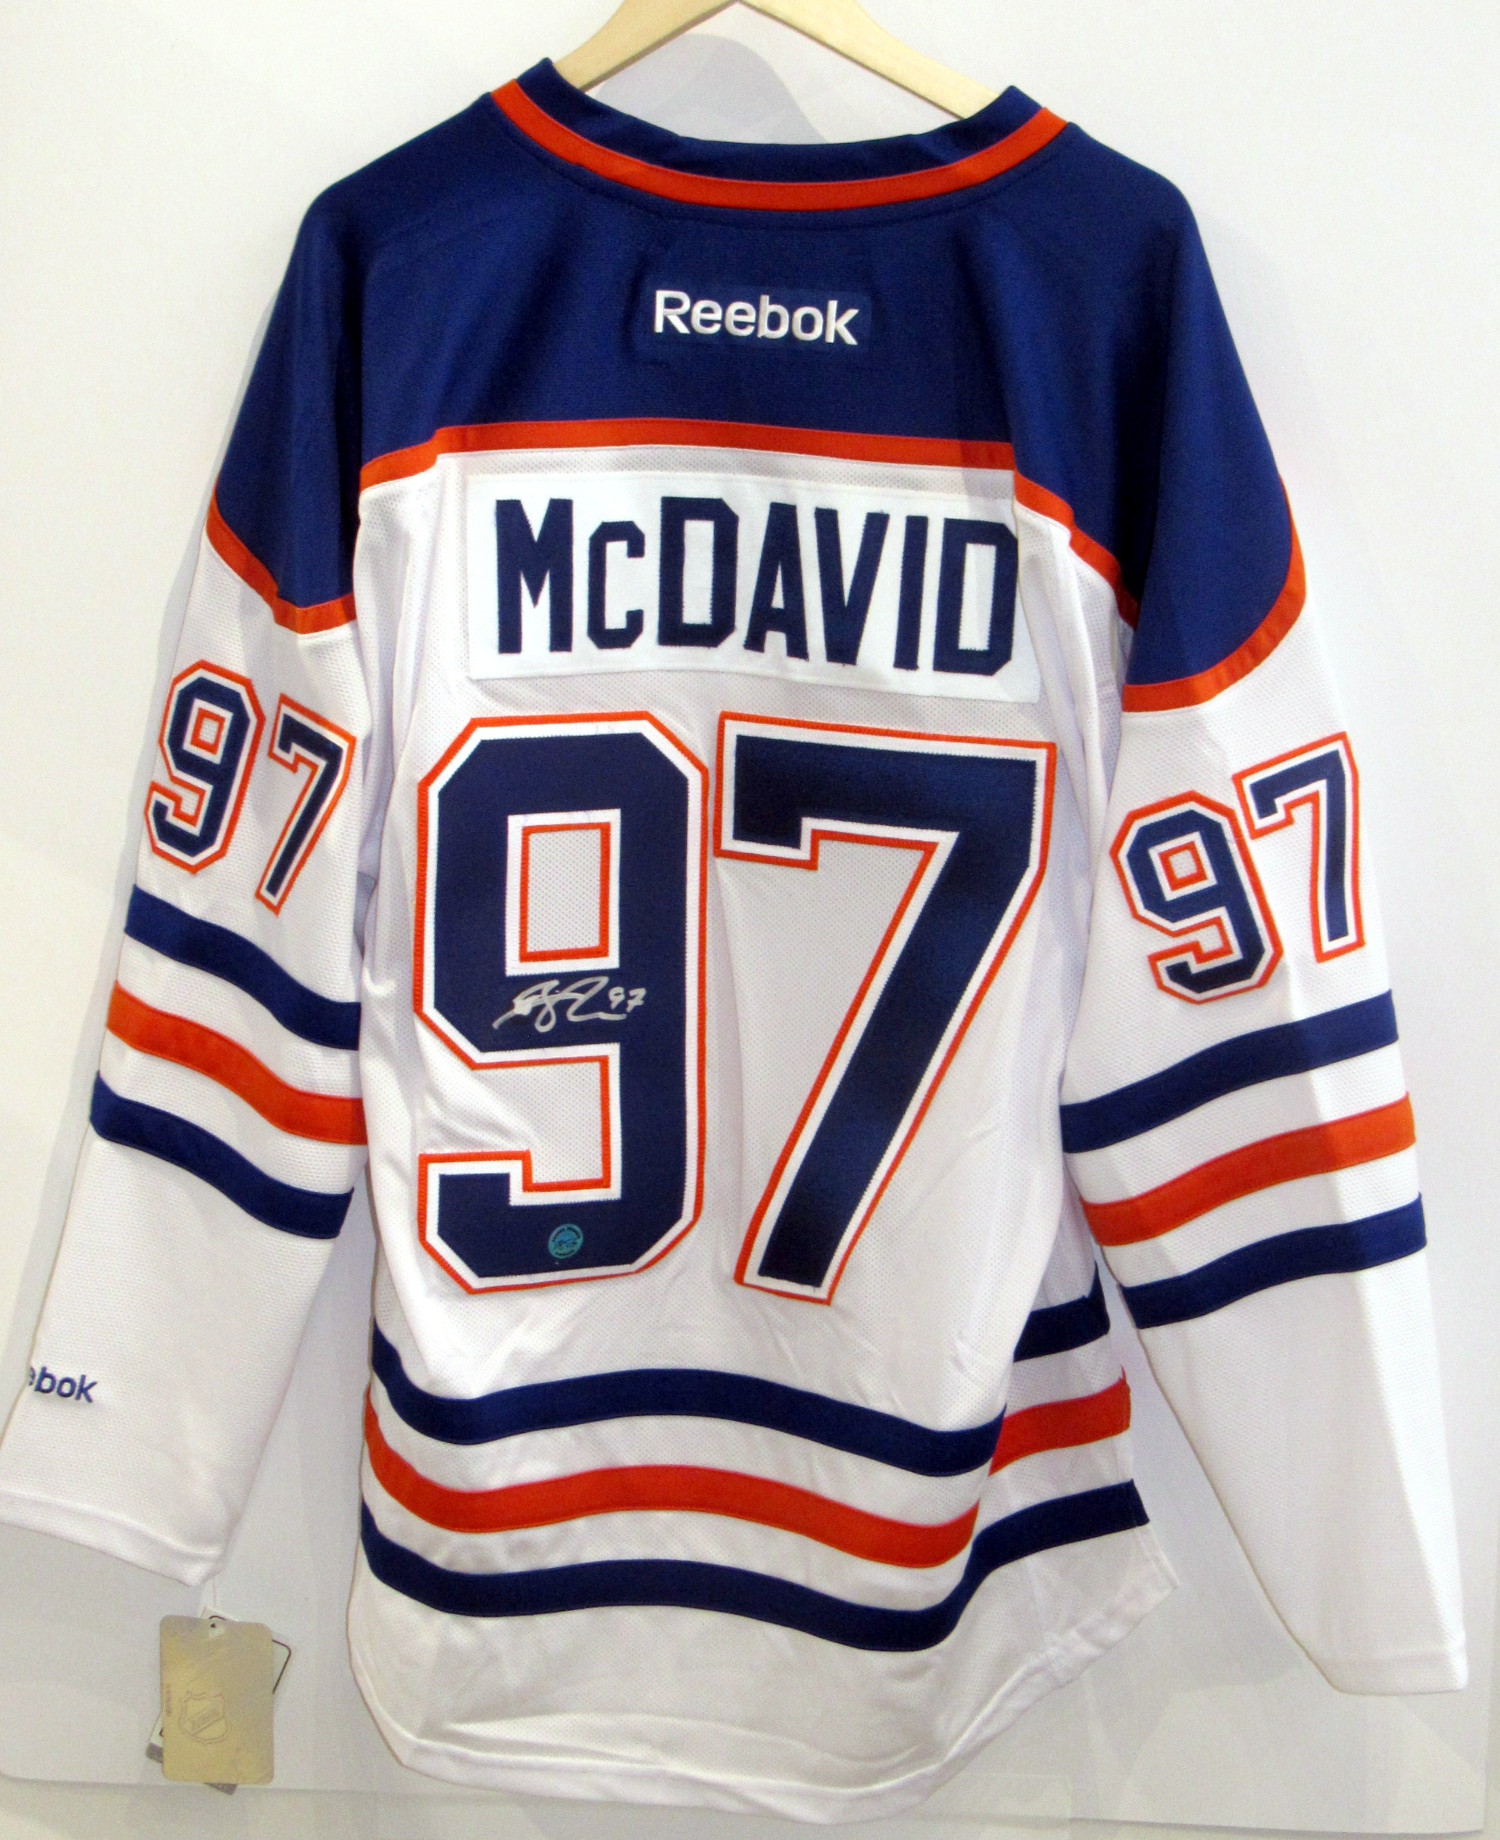 Connor McDavid Edmonton Oilers Signed Reebok Premier Draft Day Jersey with  *1st Pick 2015* Note - NHL Auctions